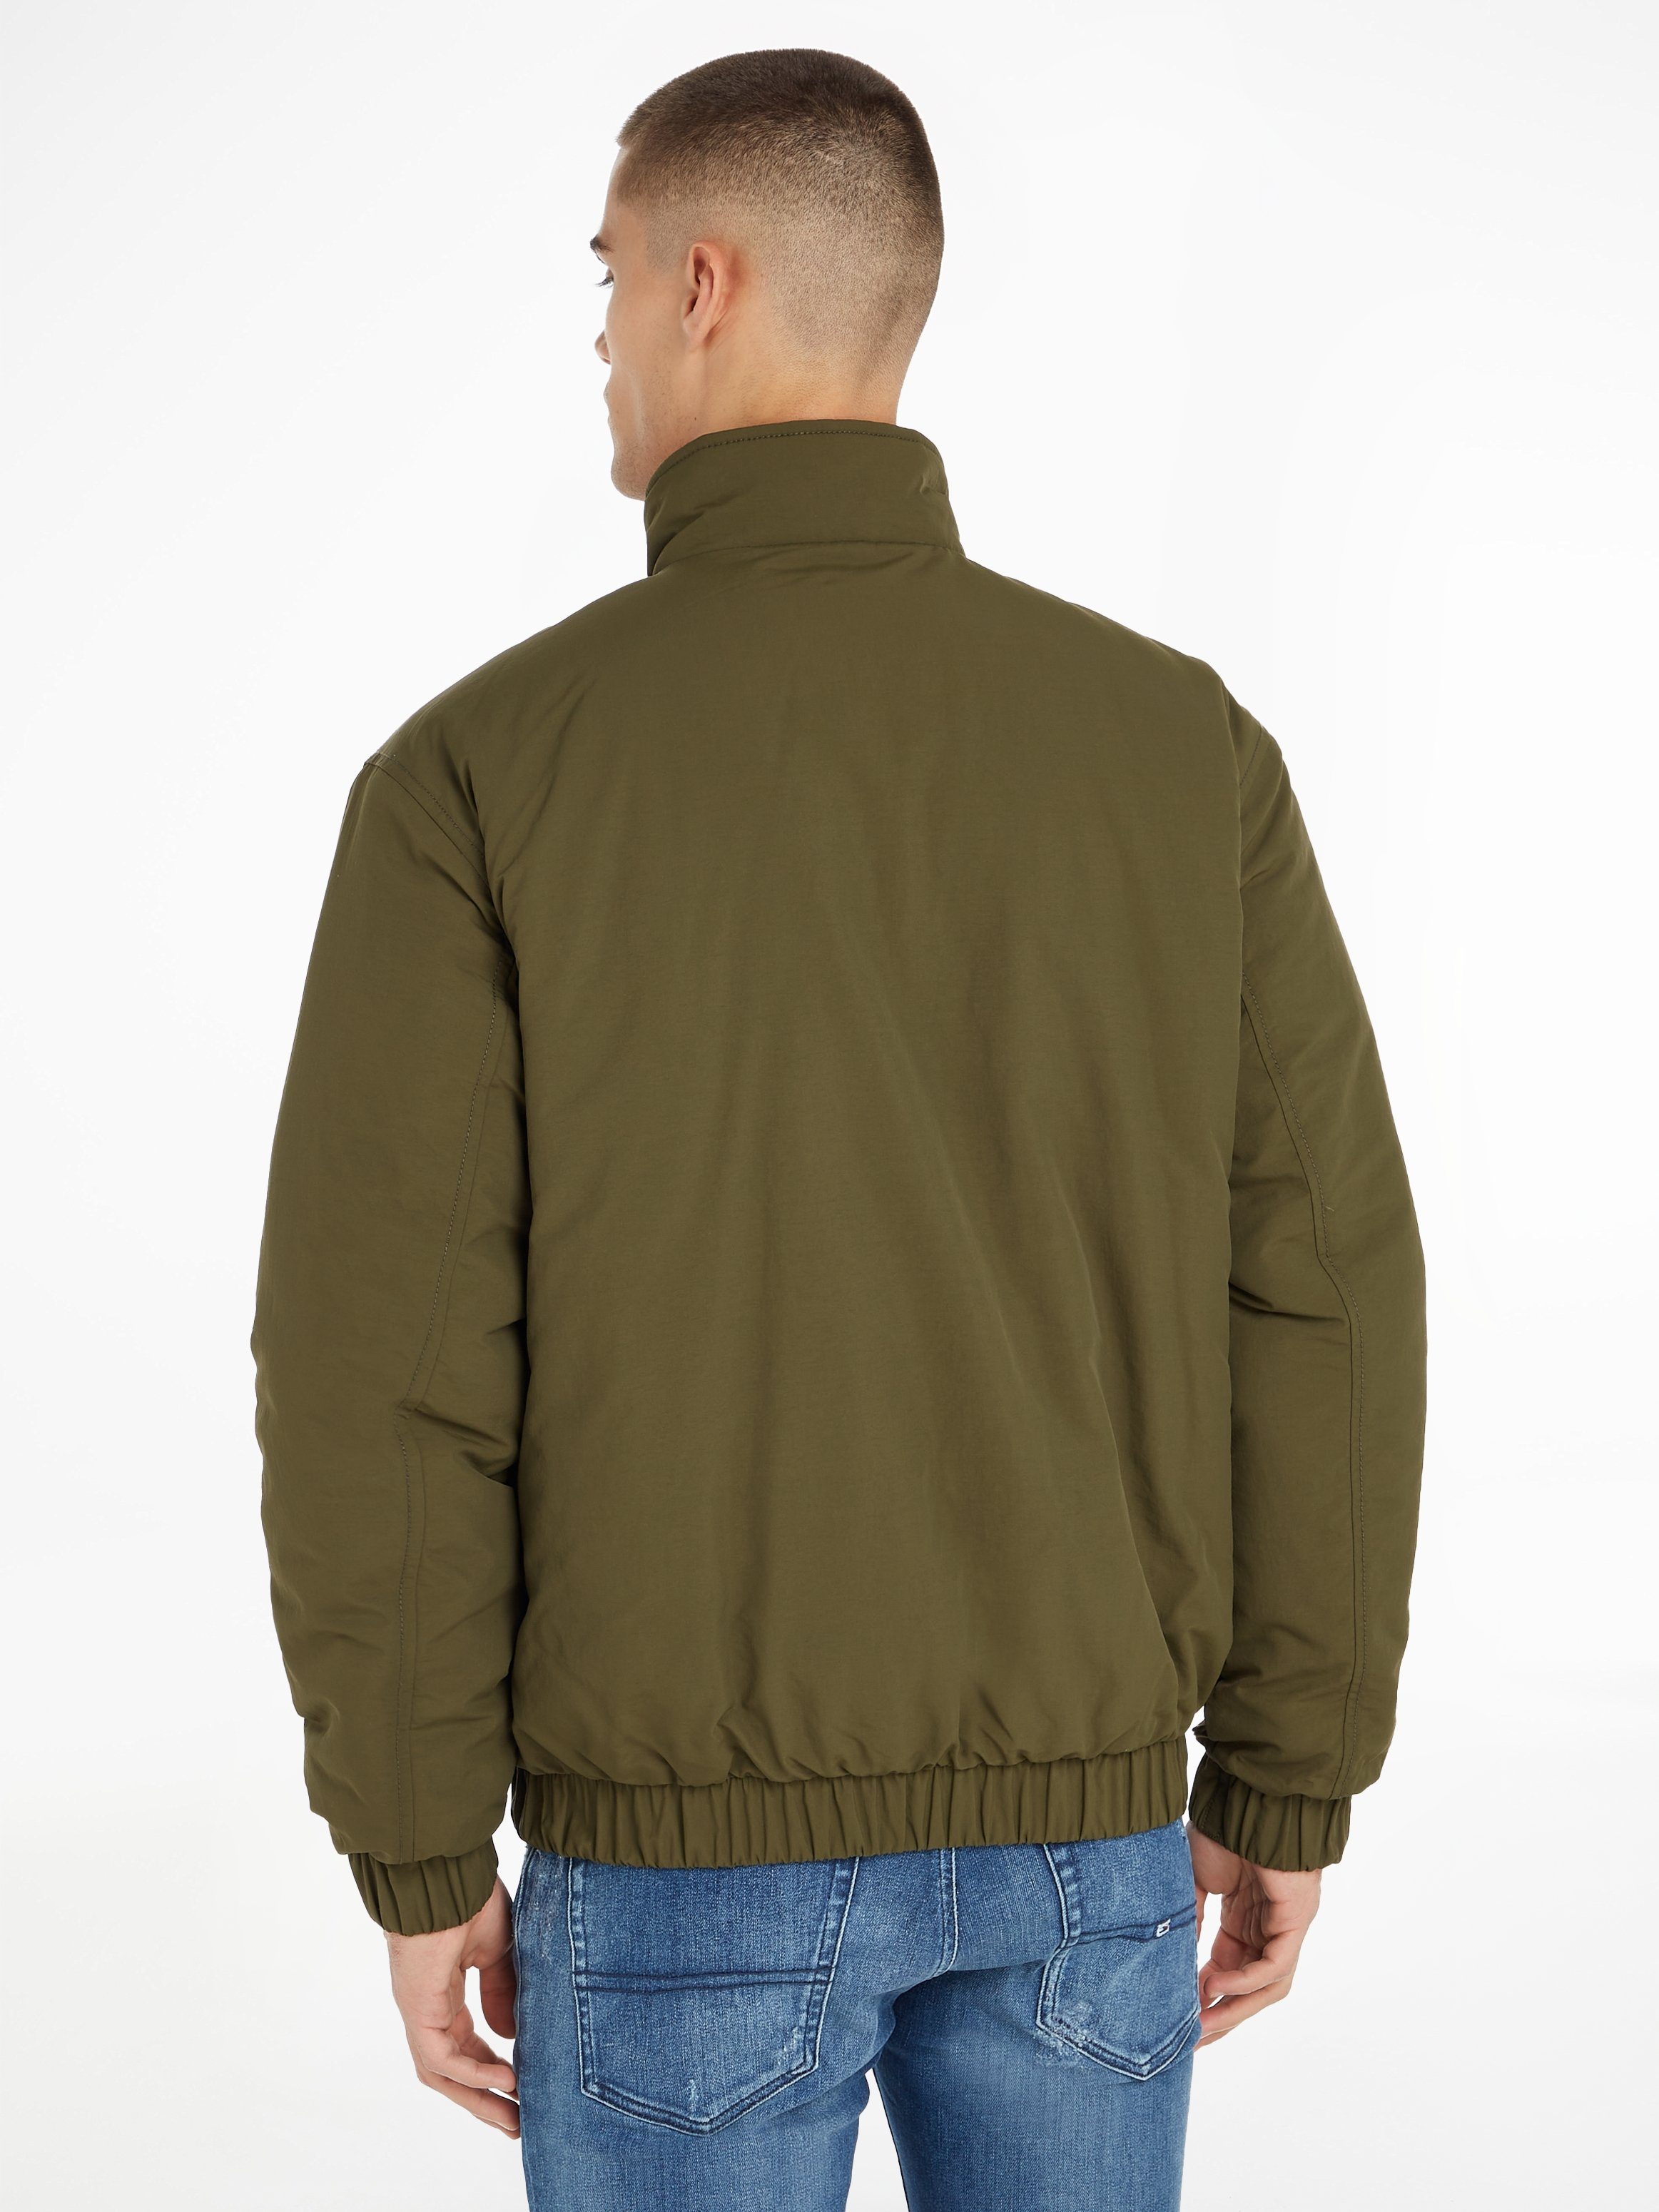 Drab Jeans PADDED ESSENTIAL Blouson JACKET Tommy Olive Green TJM